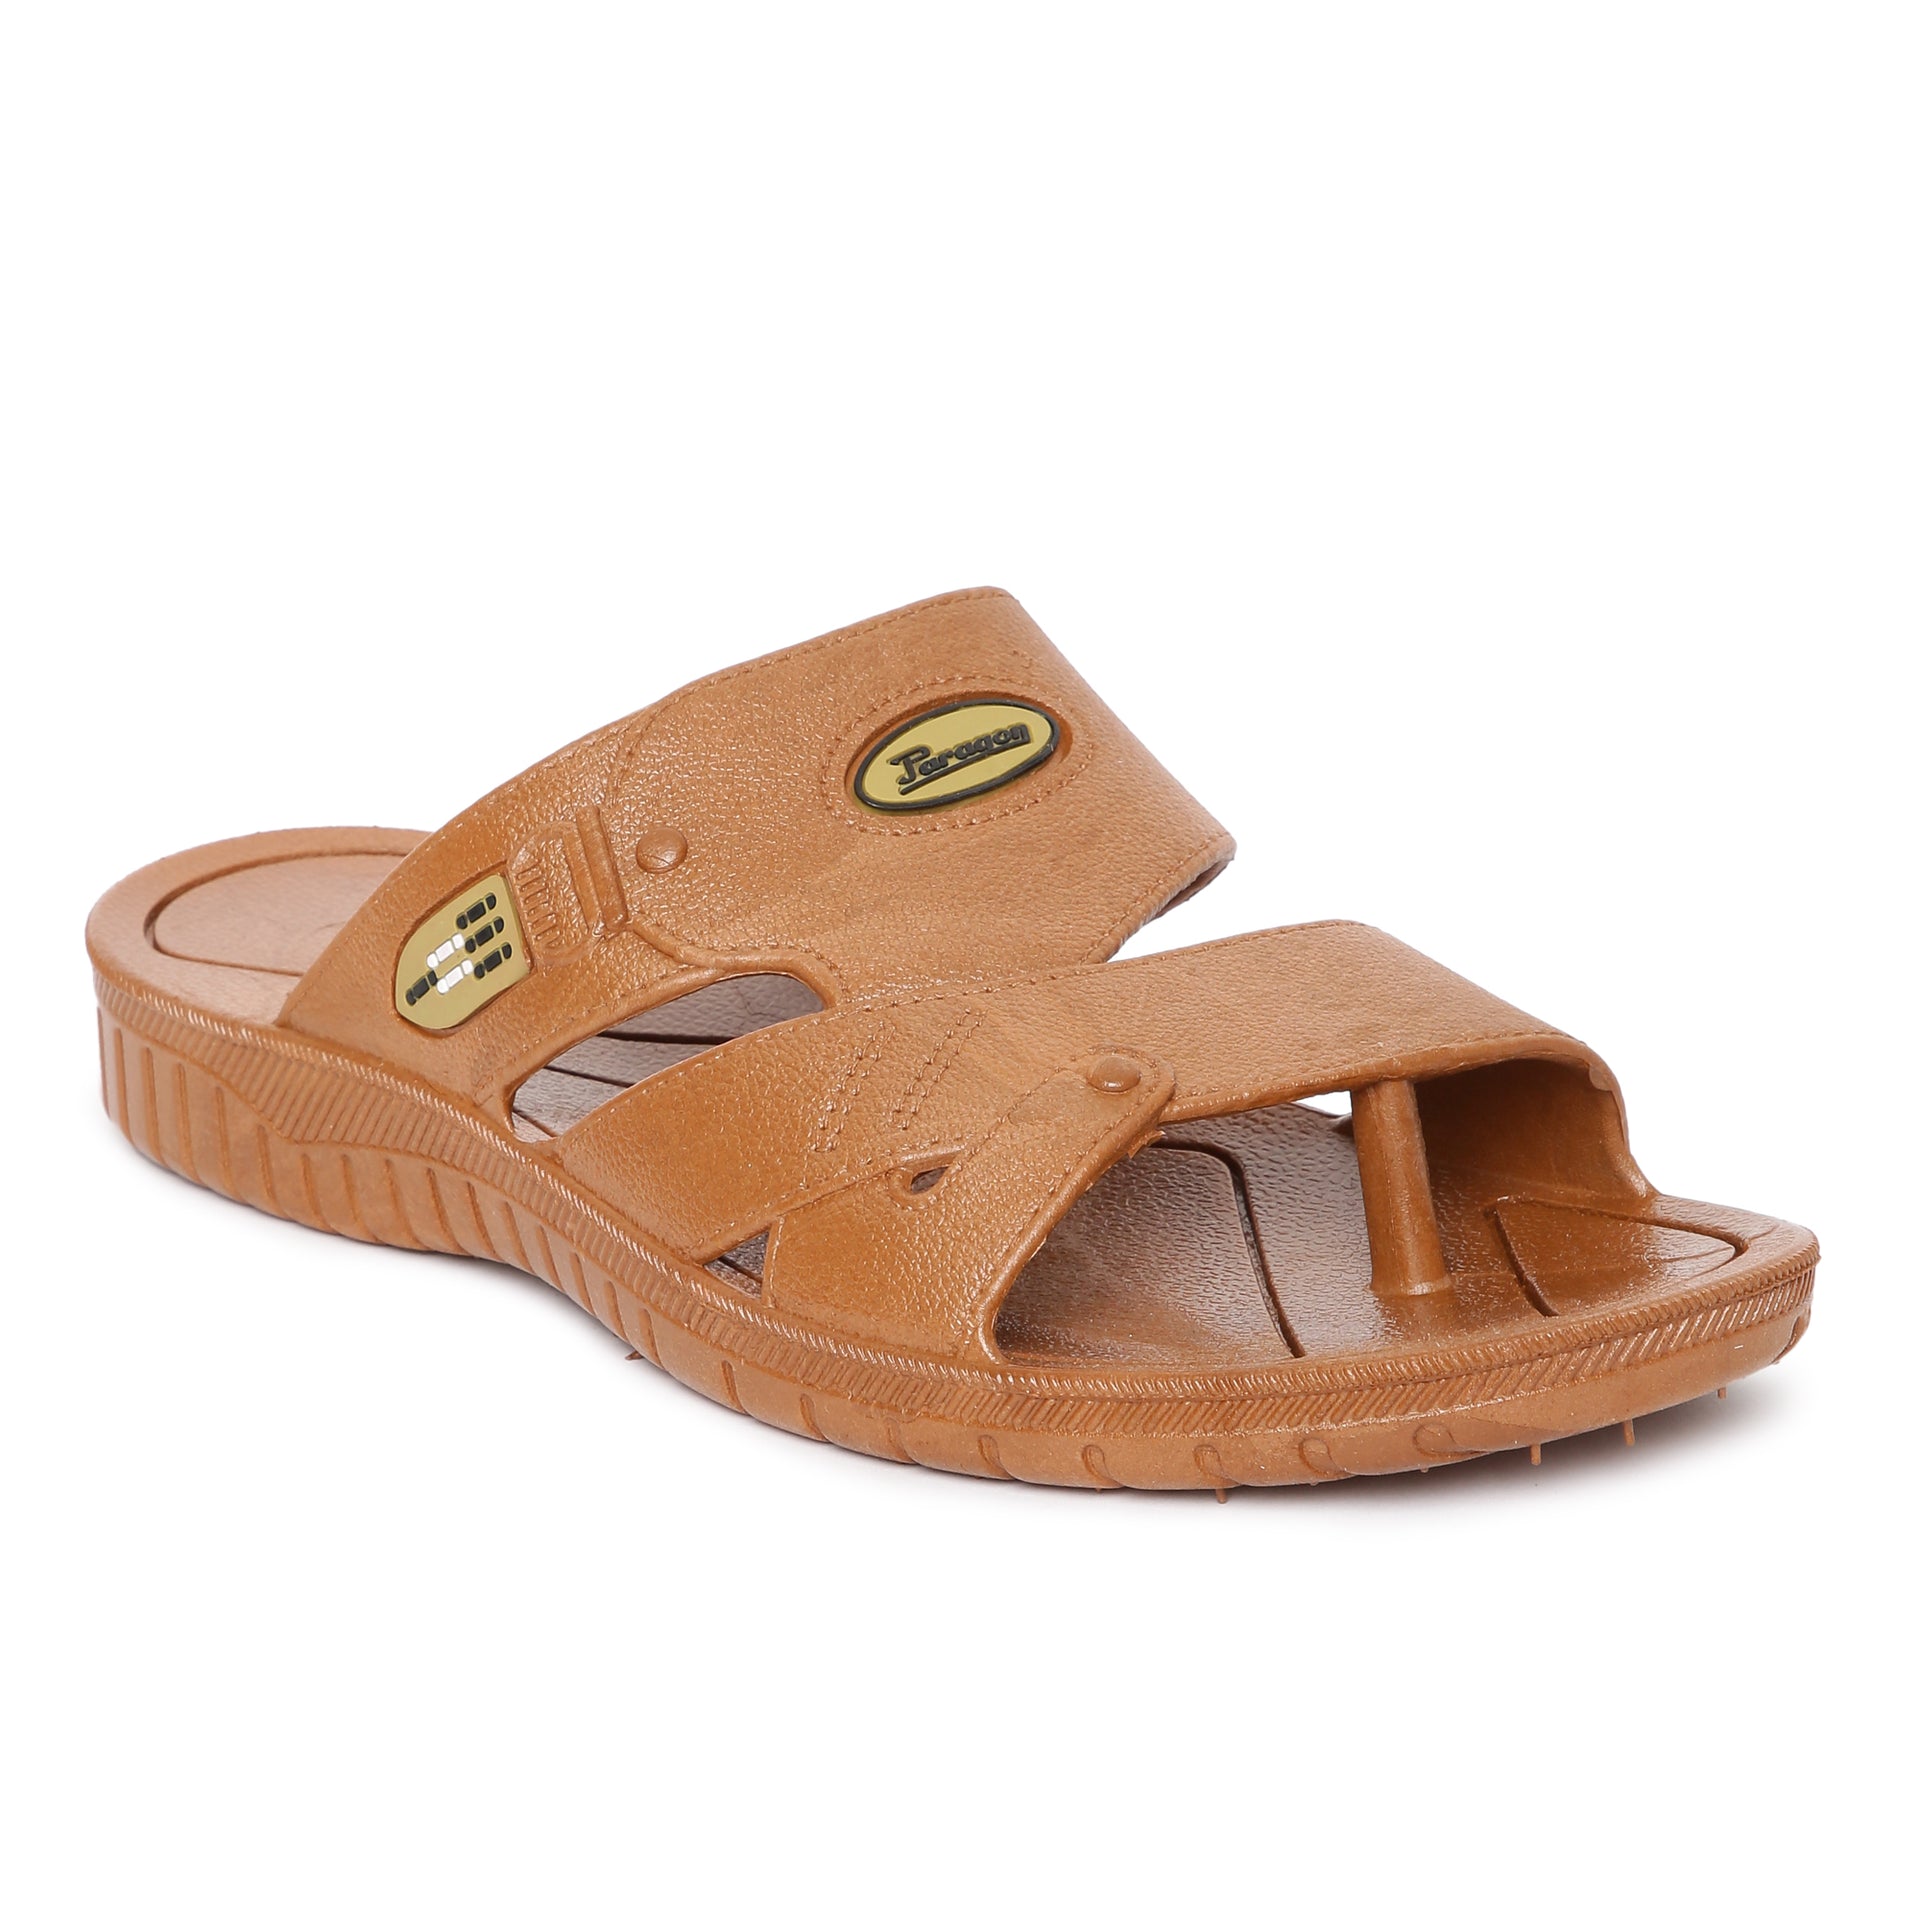 Paragon Rainwear Sandals for Men | Waterproof Sandals Made From Full PVC | Latest Casual Floater Sandals from Paragon Escoute